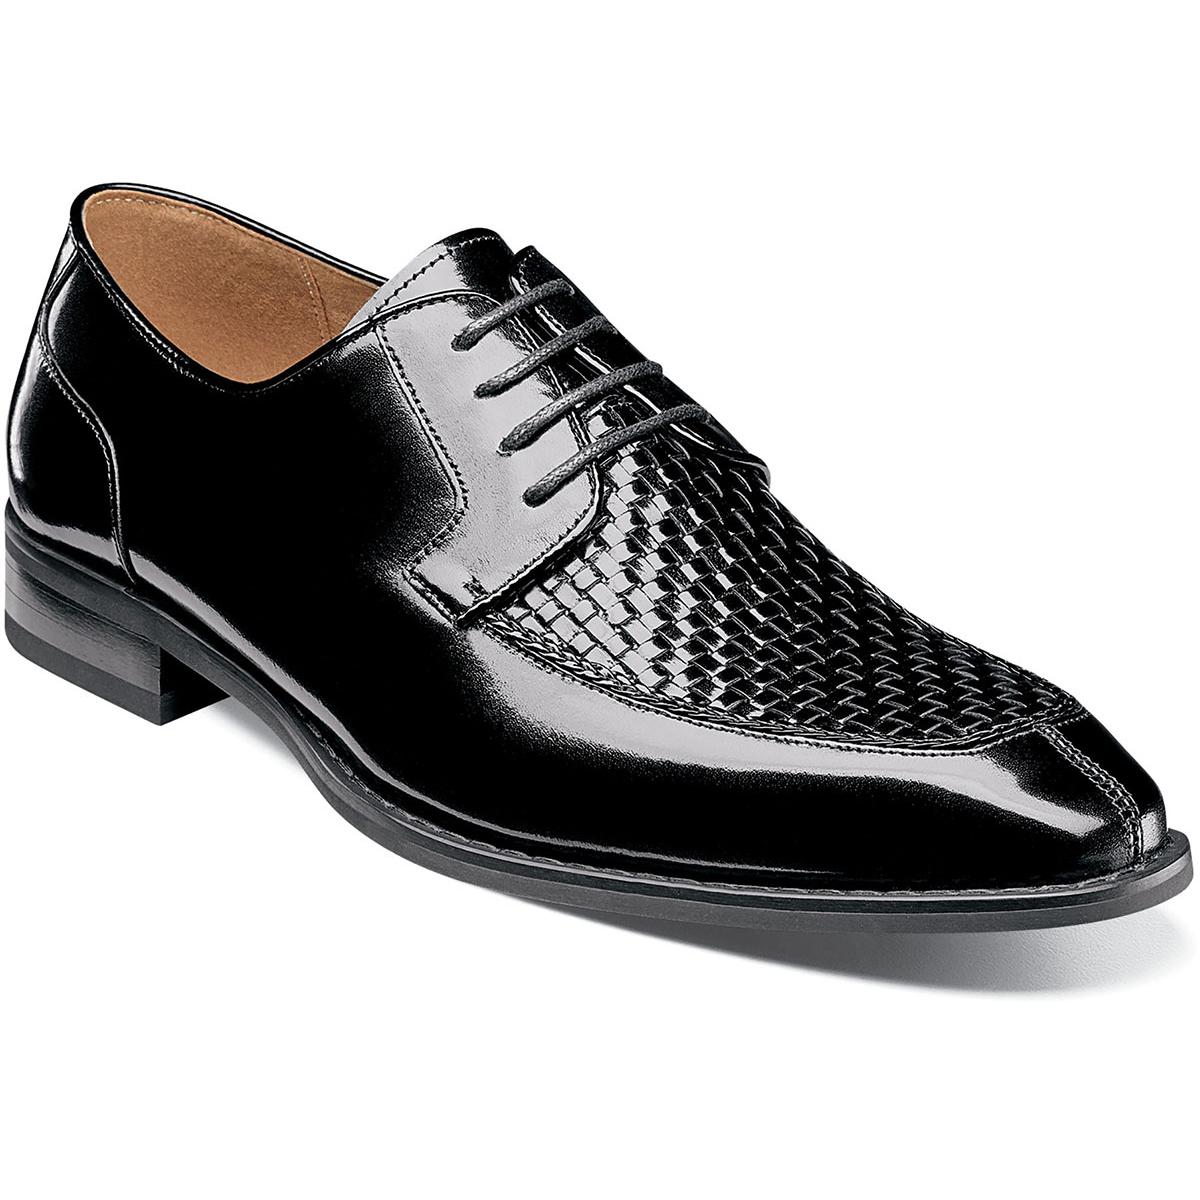 Stacy Adams Winthrop BlacK Genuine Leather Moc Toe Woven Shoes 25242 ...